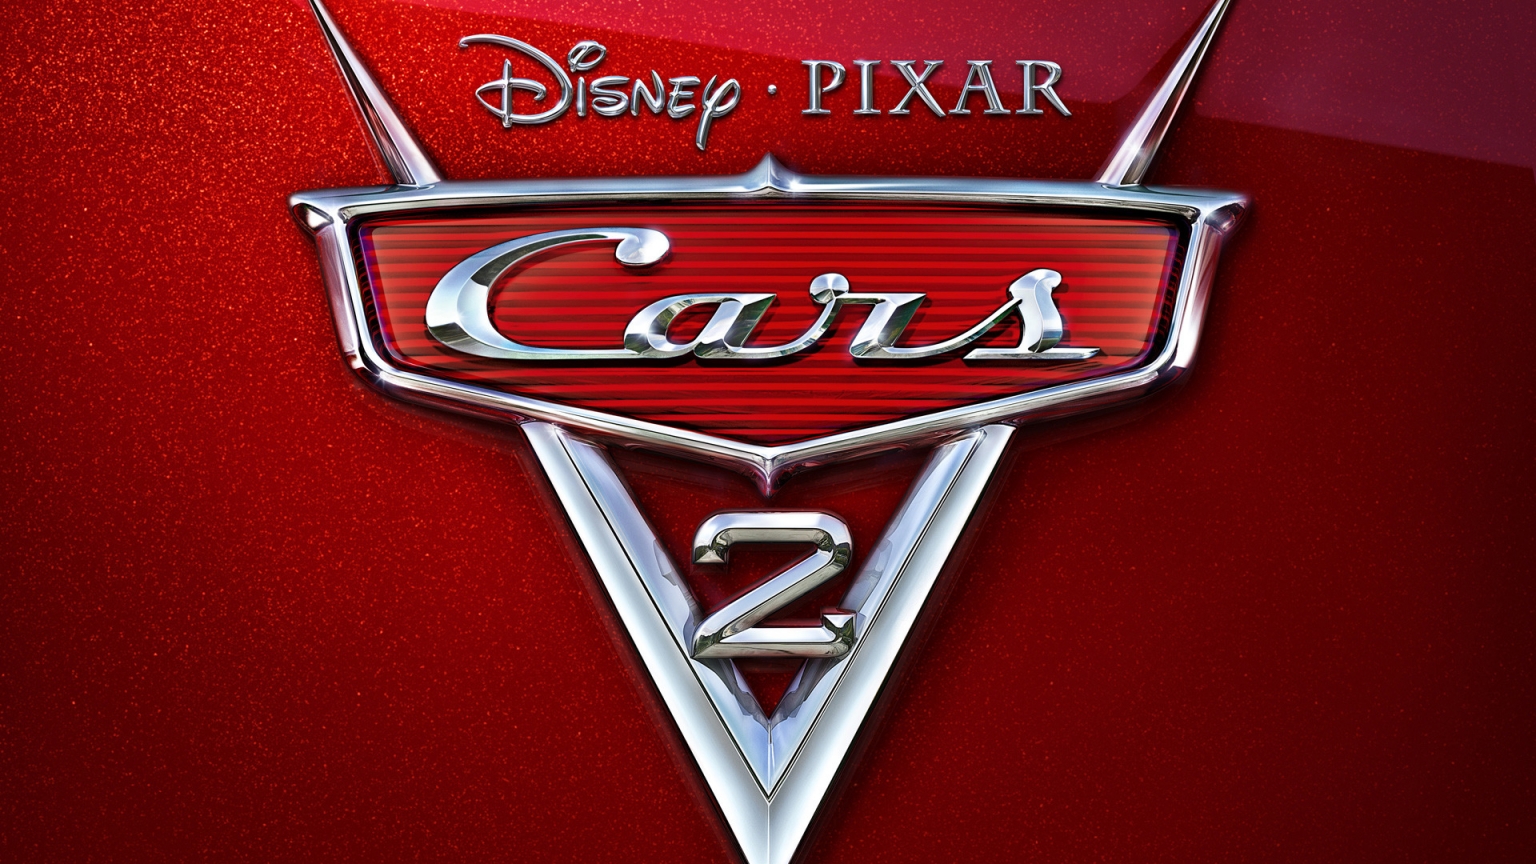 Cars 2 for 1536 x 864 HDTV resolution